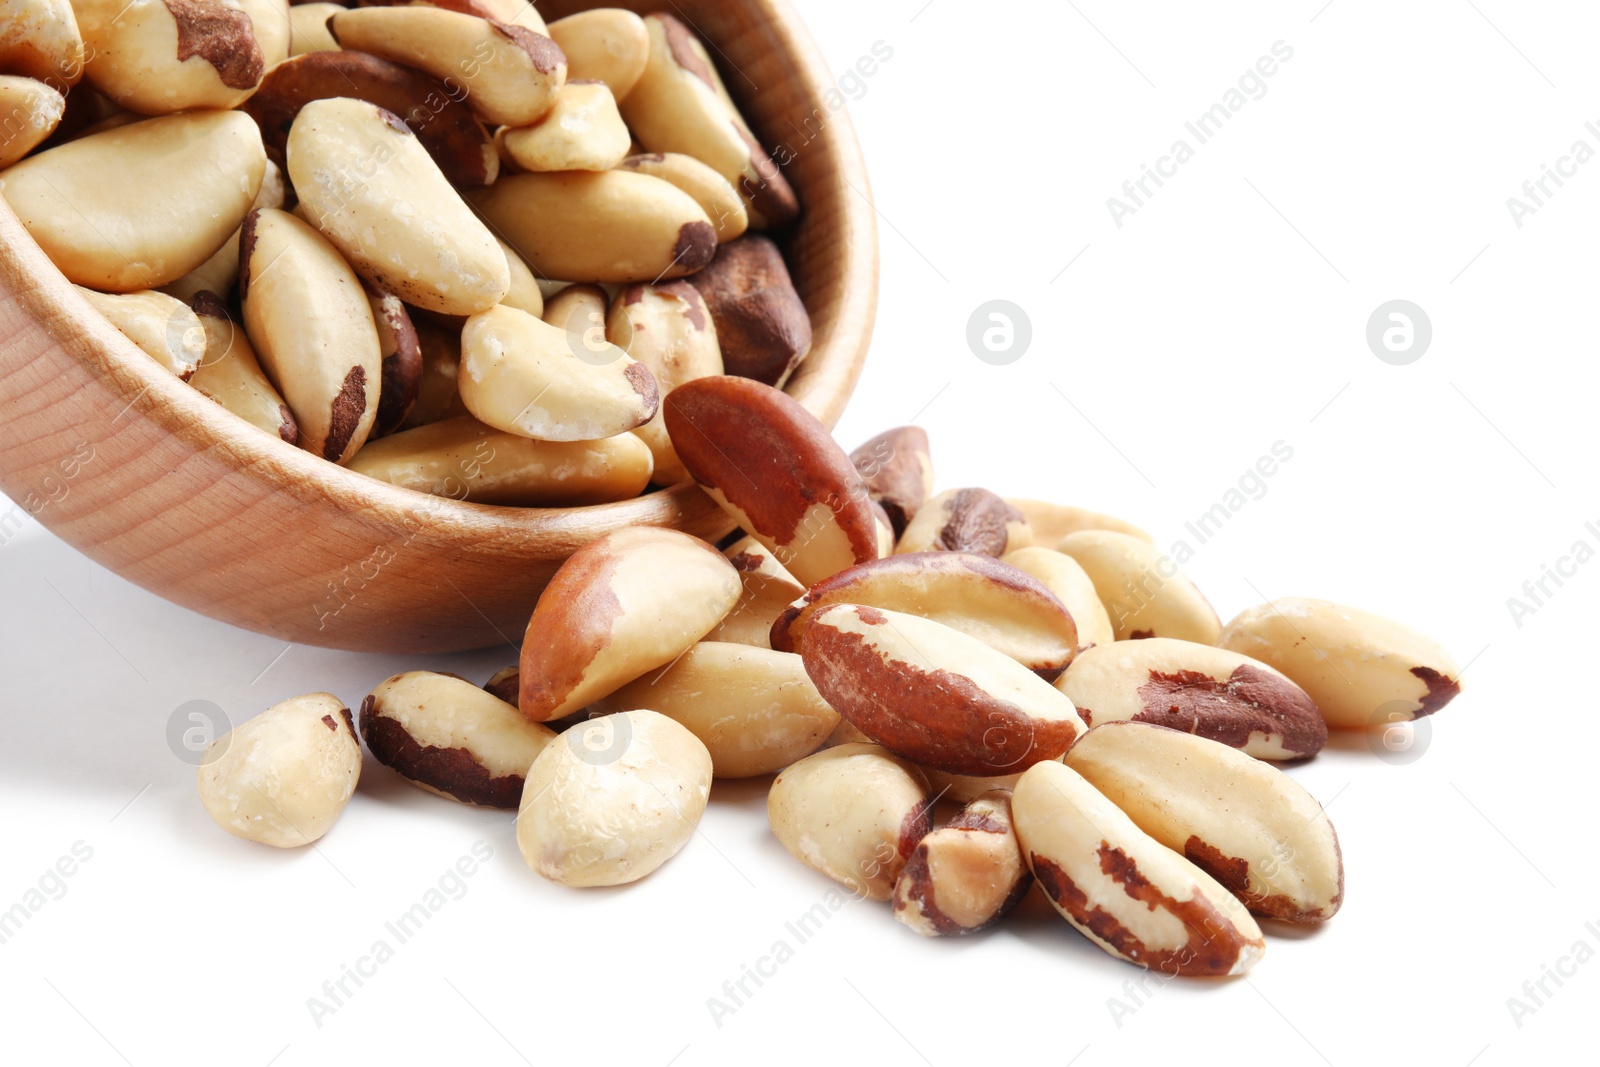 Photo of Wooden bowl with Brazil nuts on white background